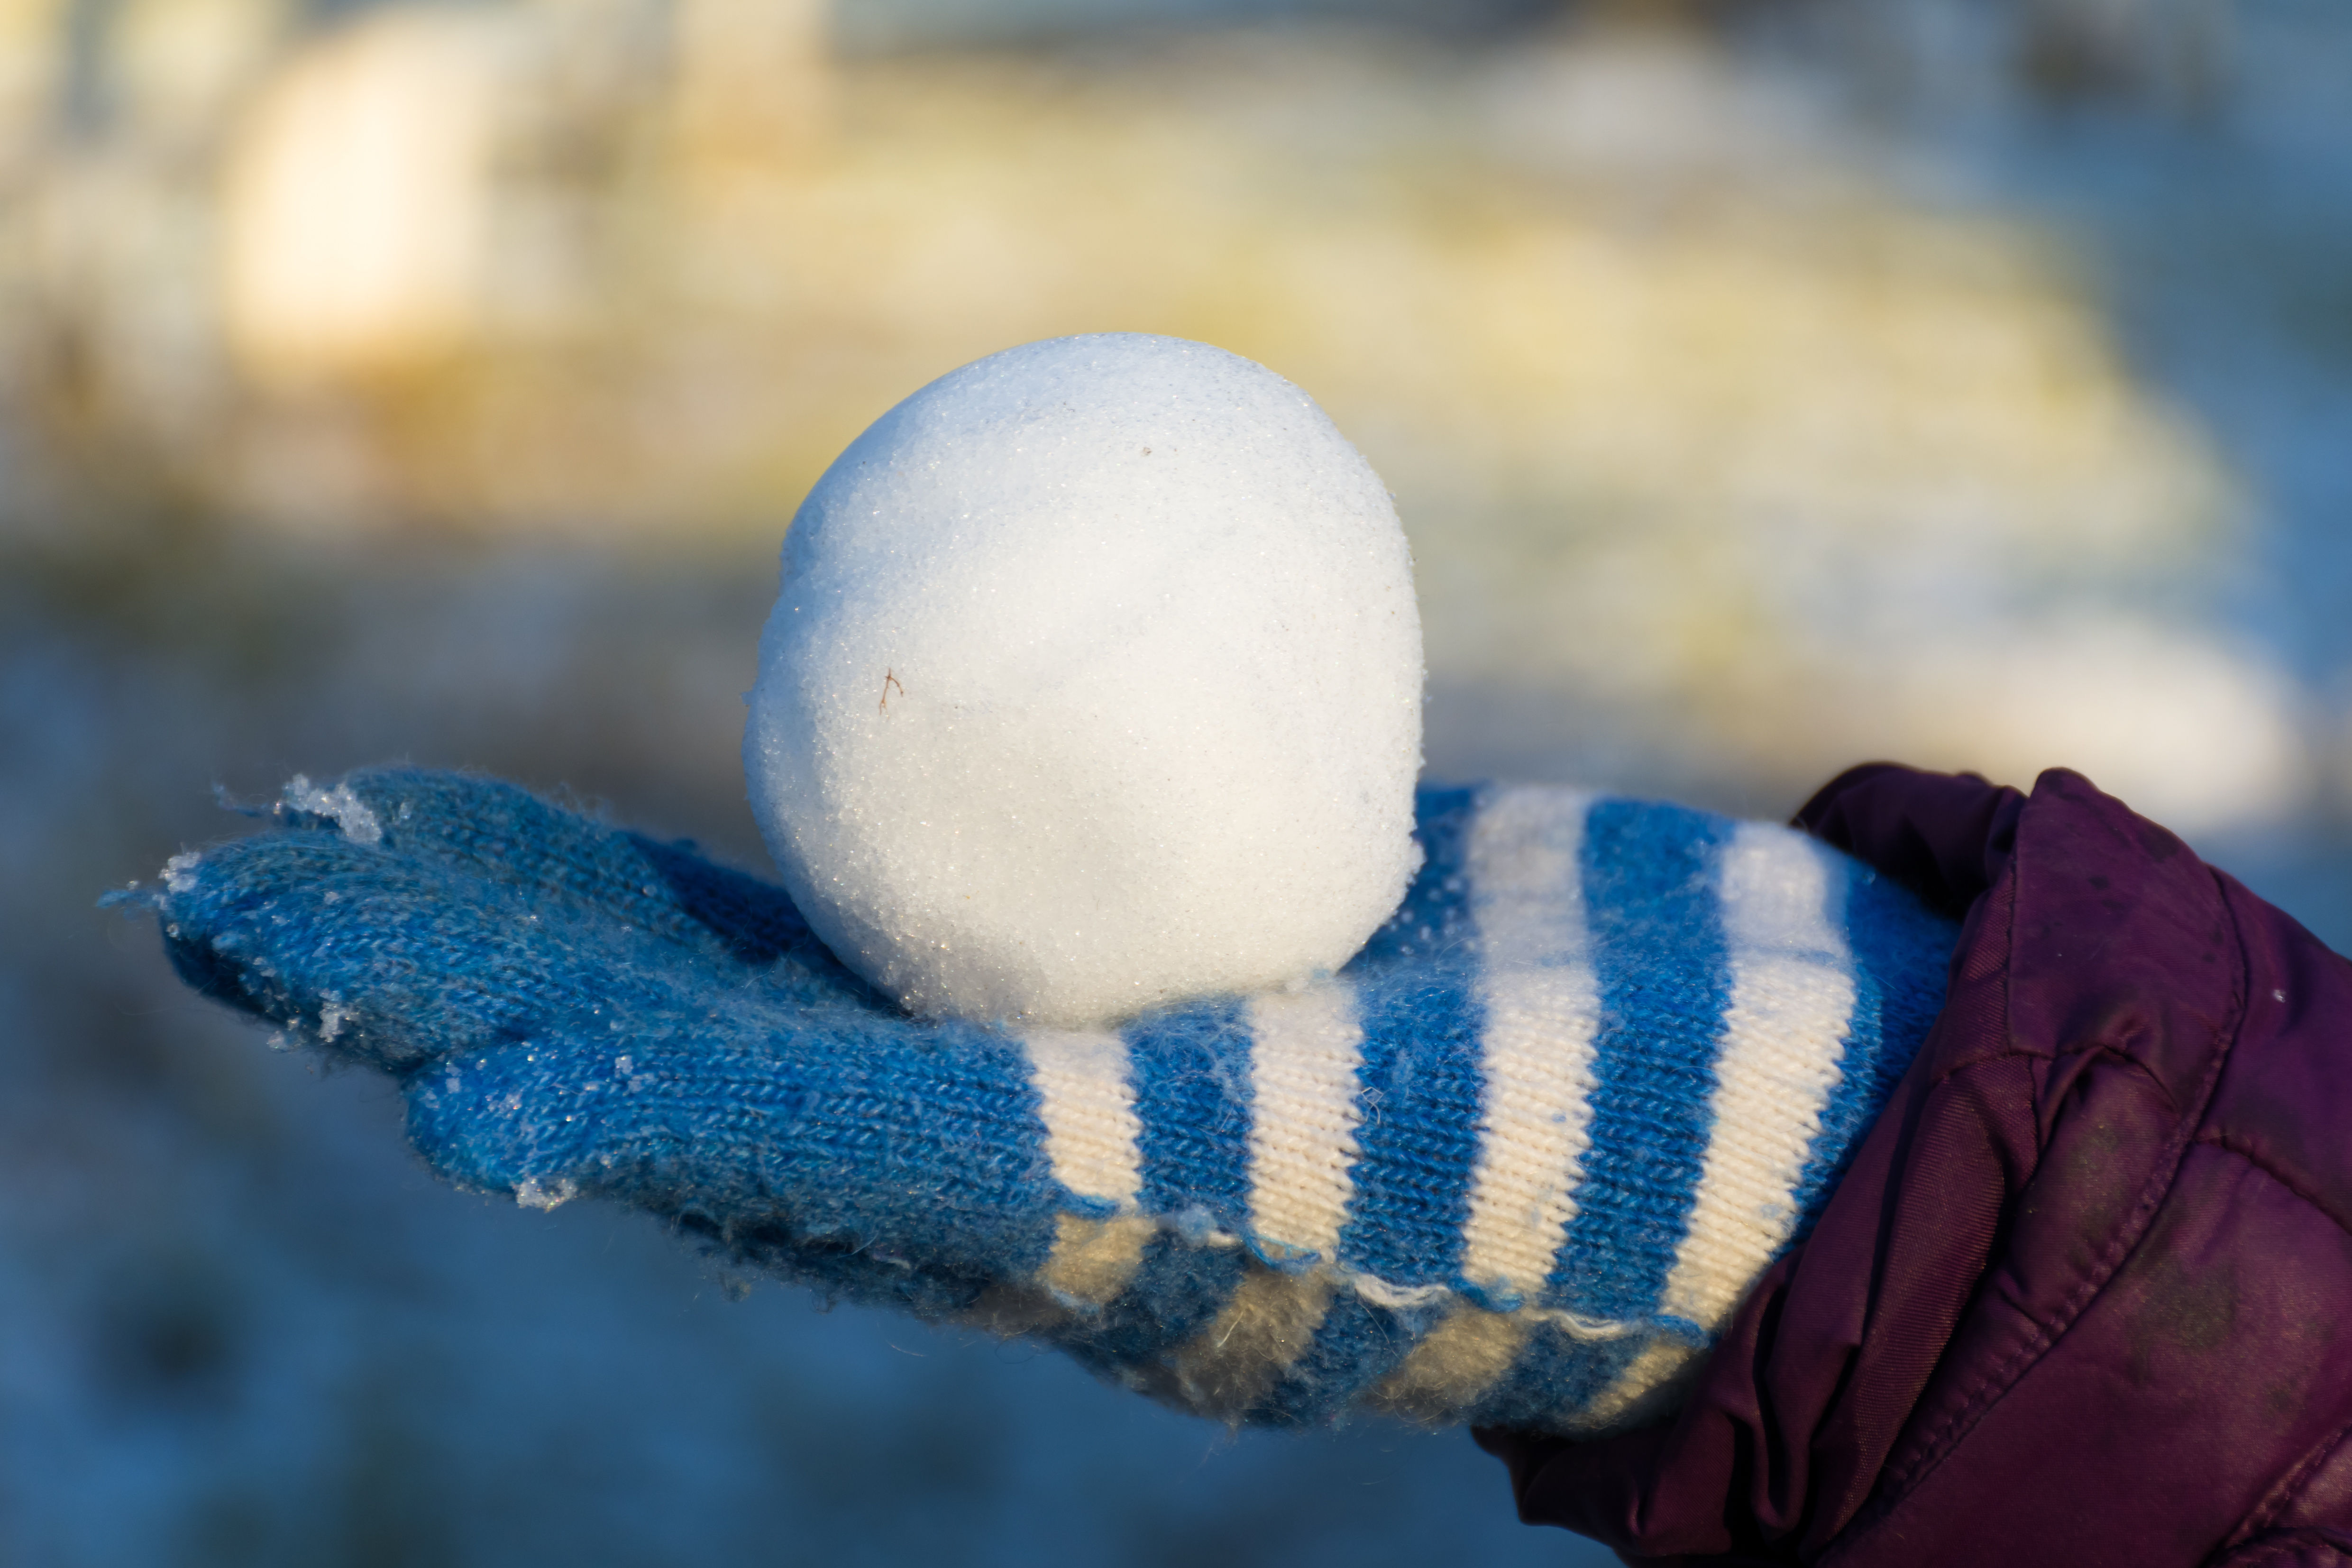 Snowball in a child's gloved hand. The glove is blue and white striped. 